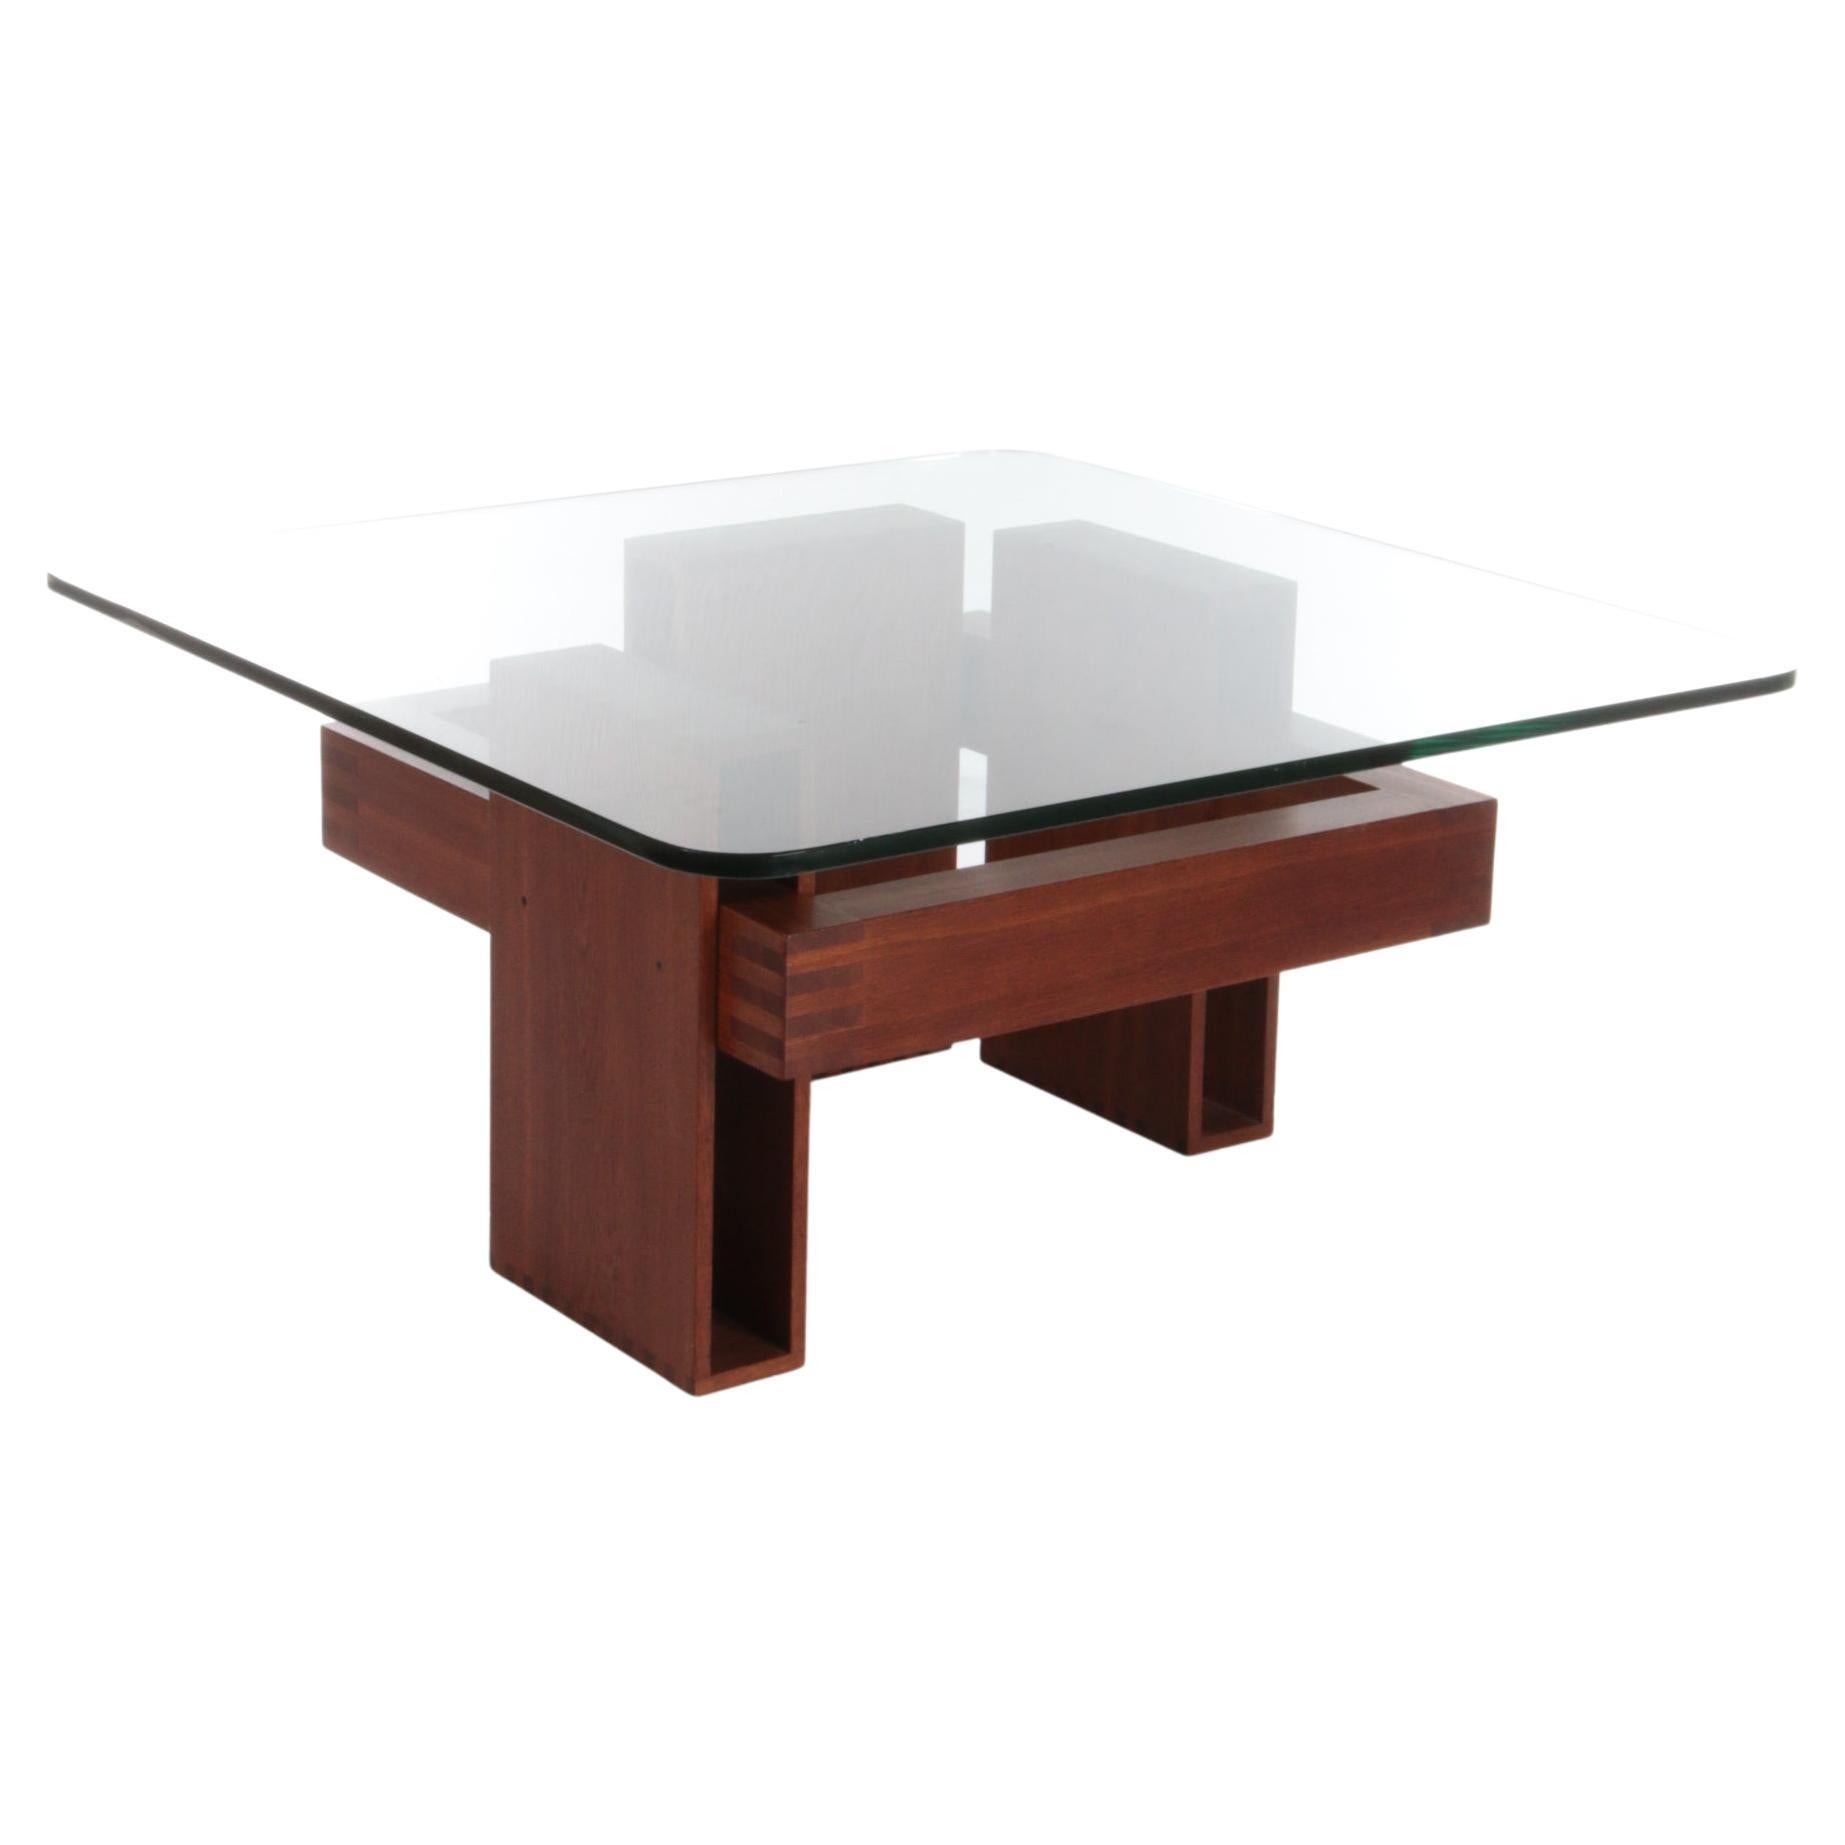 French Brutalist Design Coffee Table of Teak with Glass Top, 1970